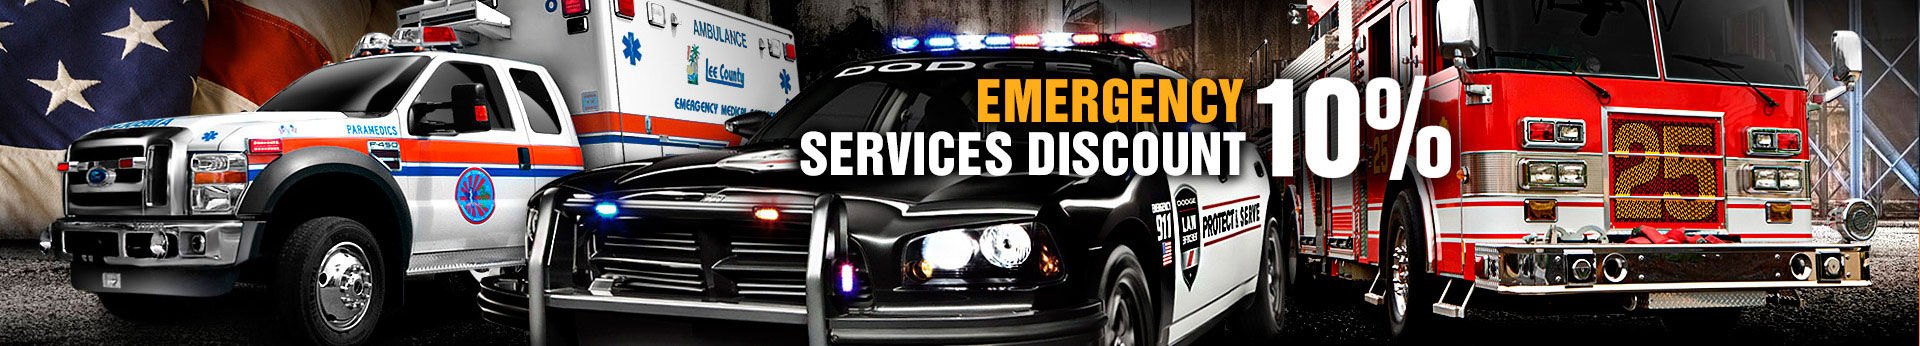 First Responder Discounts - Police, Firefighters, Paramedics